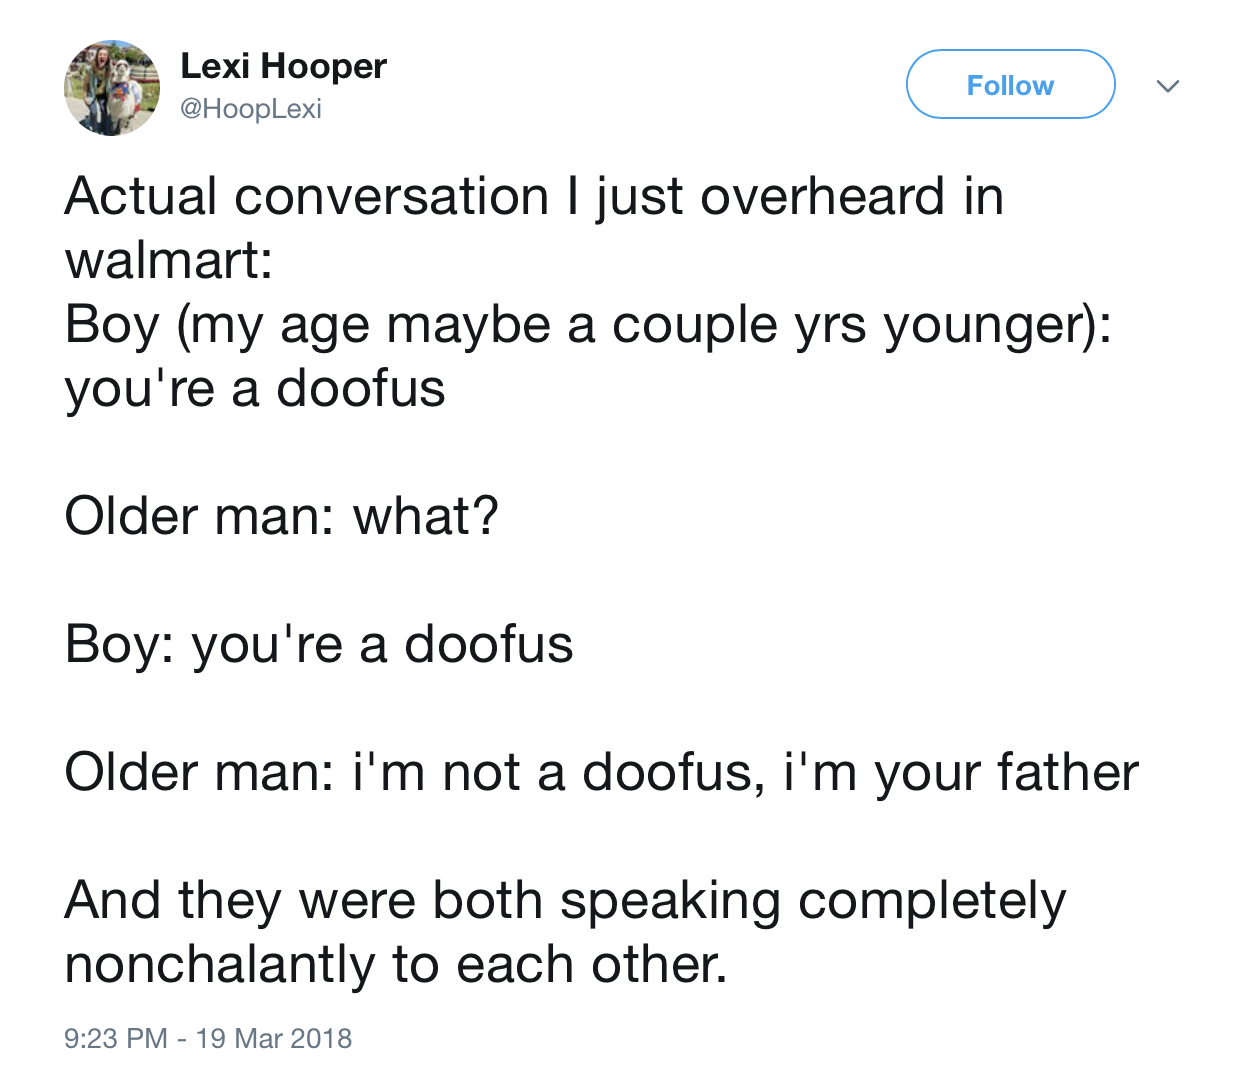 angle - Lexi Hooper Actual conversation I just overheard in walmart Boy my age maybe a couple yrs younger you're a doofus Older man what? Boy you're a doofus Older man i'm not a doofus, i'm your father And they were both speaking completely nonchalantly t